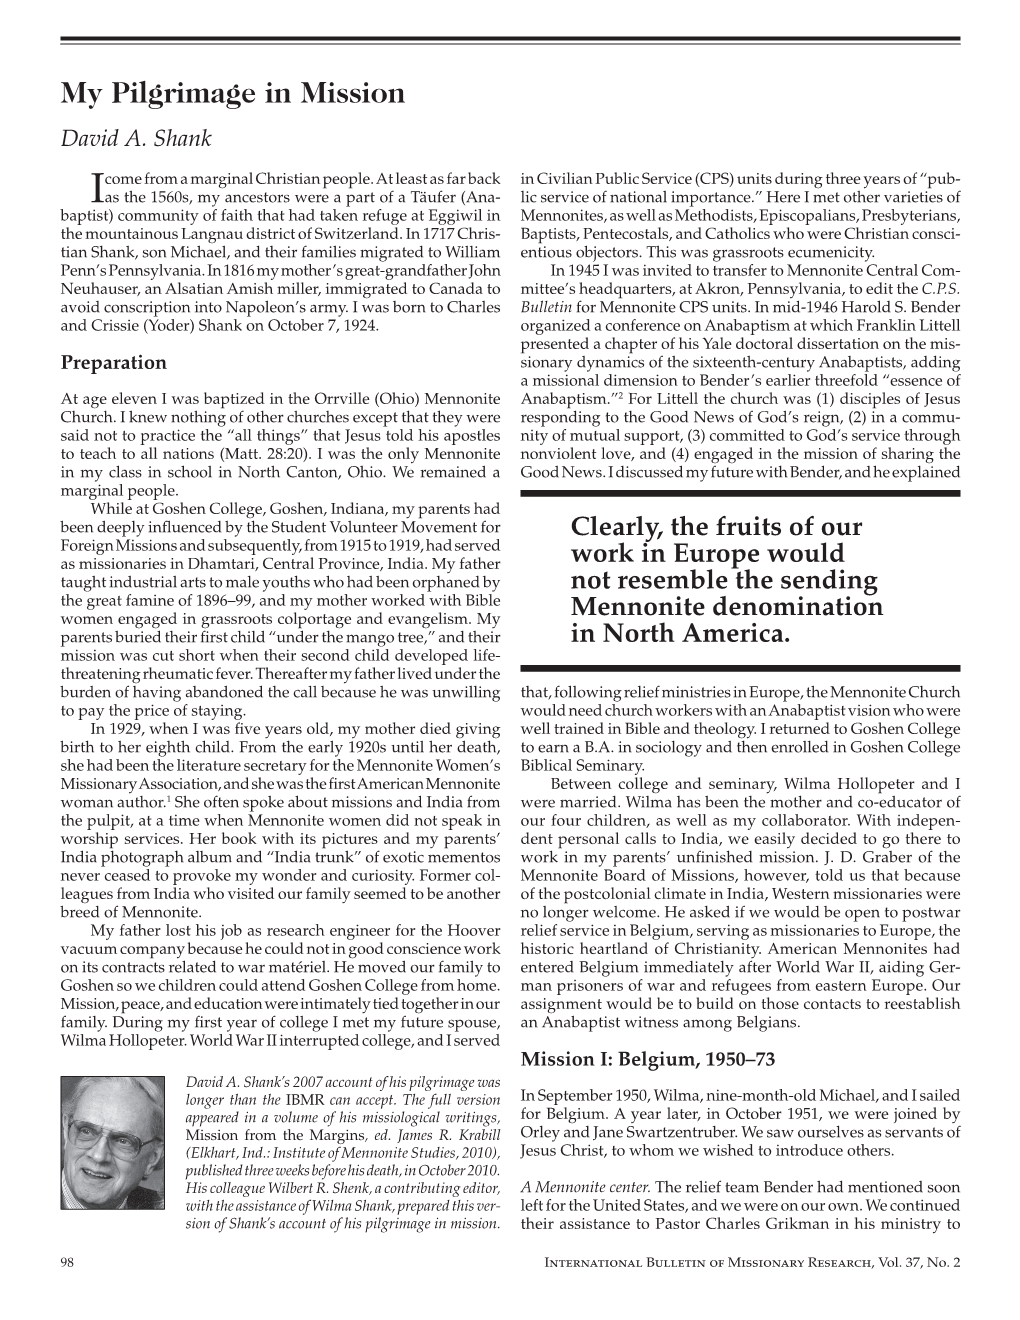 International Bulletin of Missionary Research, Vol 37, No. 2